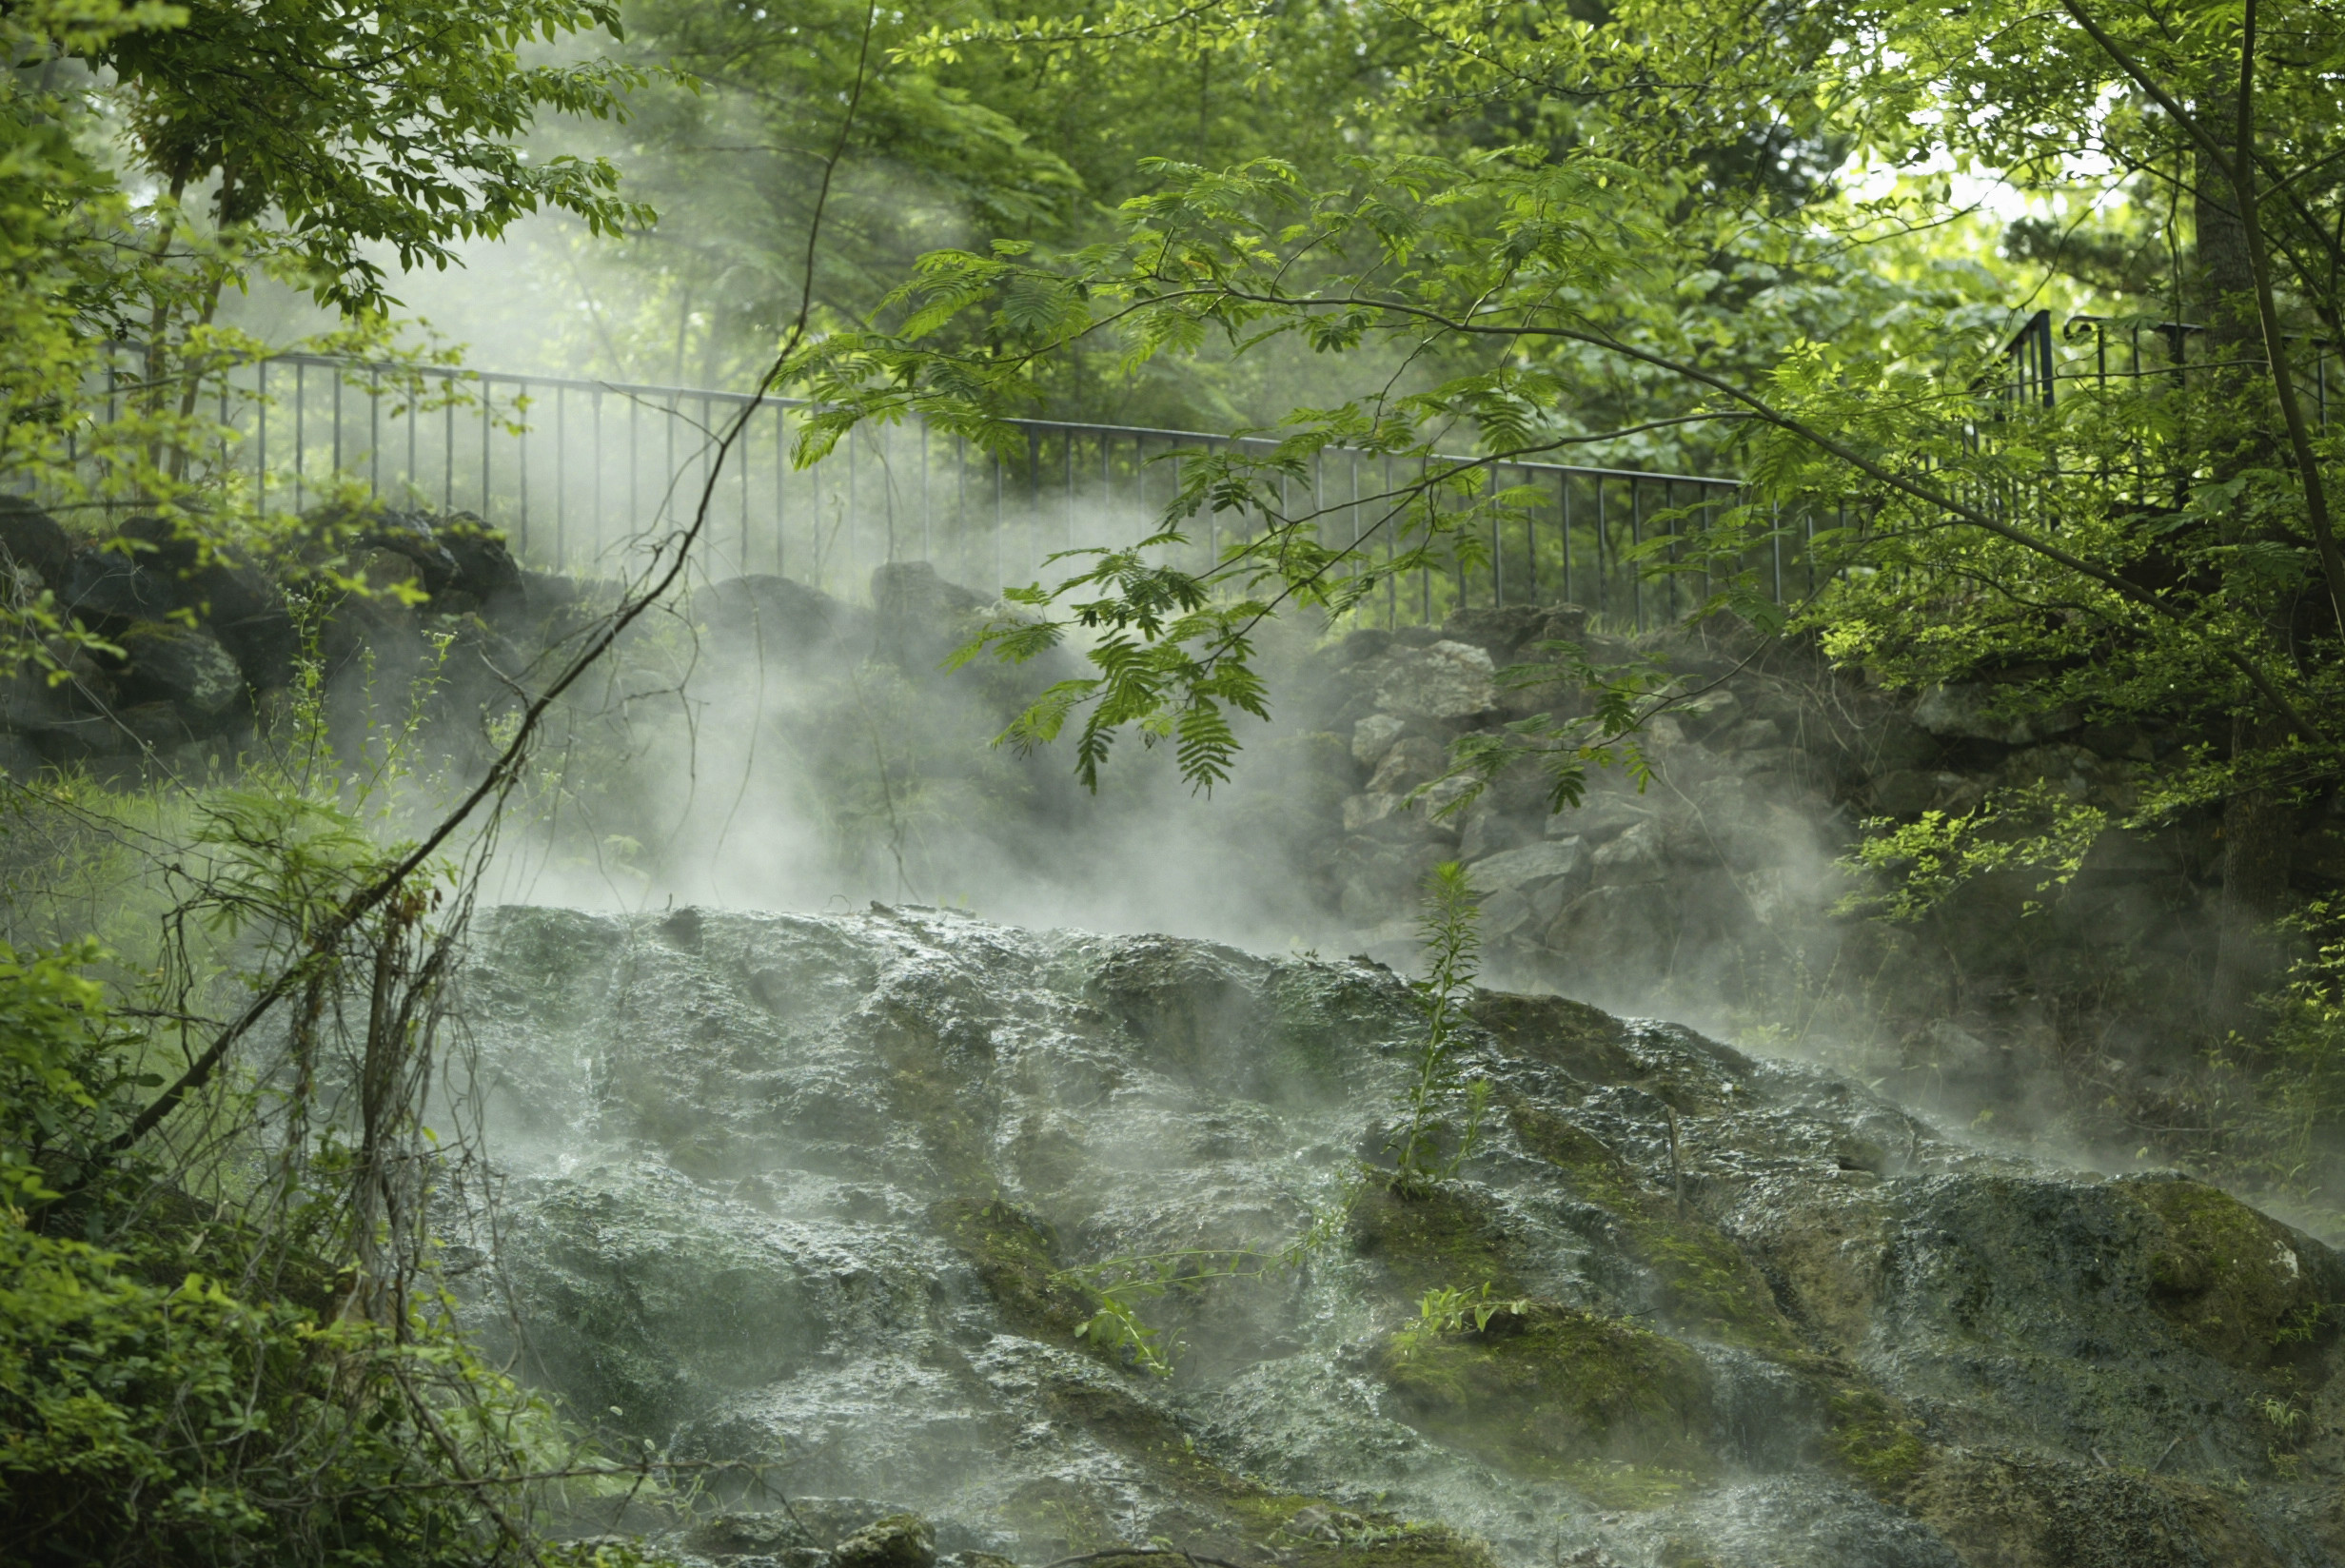 PHOTO: Steam rises from a hot spring at Arlington Lawn in Hot Springs National Park, Arkansas.